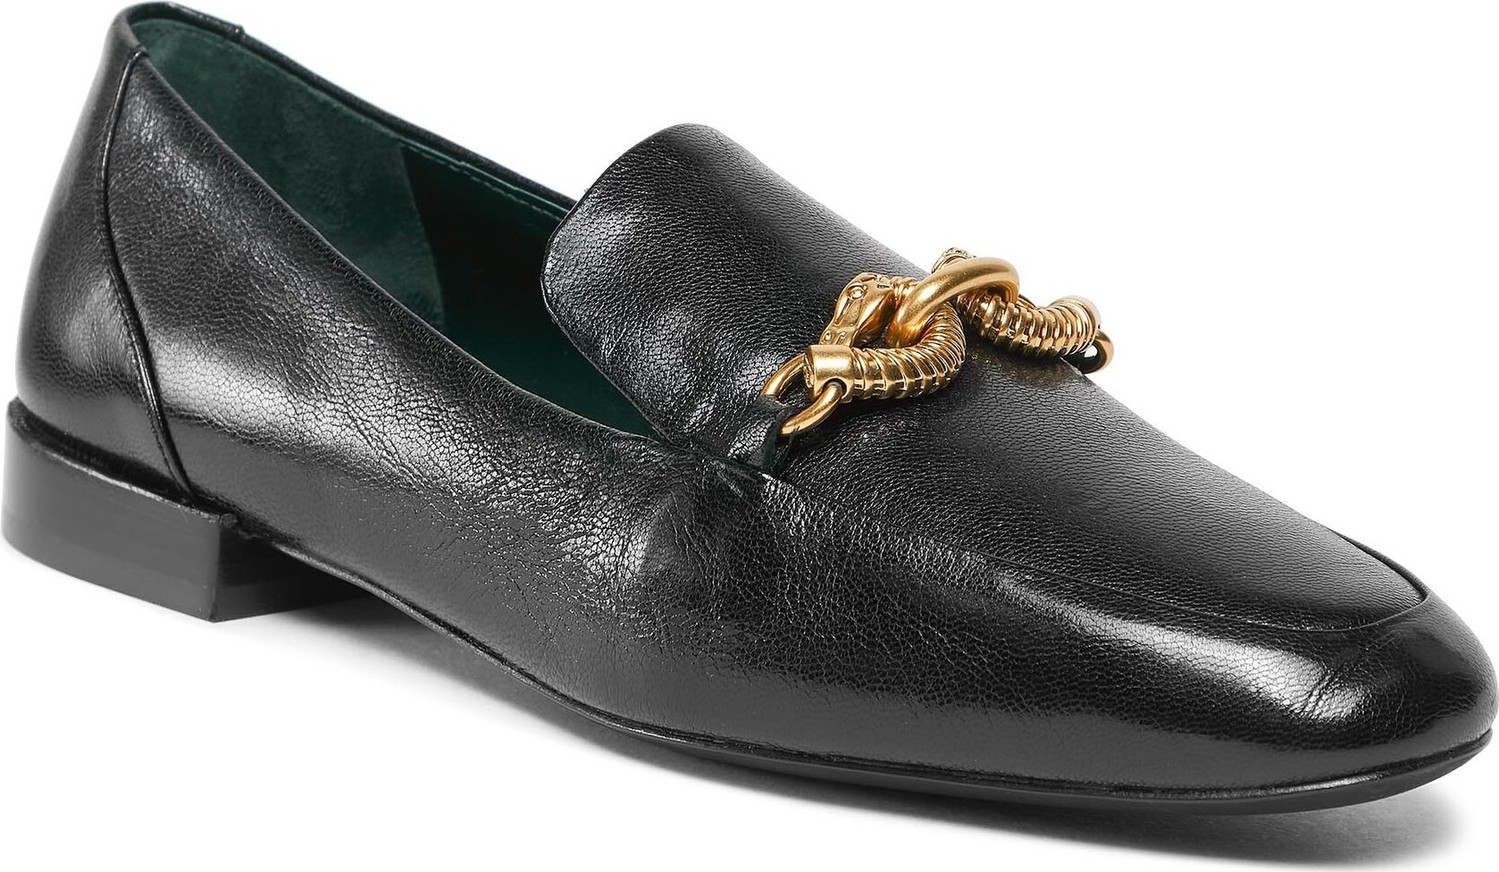 Lordsy Tory Burch Jessa Loafer 152718 Perfect Black / Gold 006